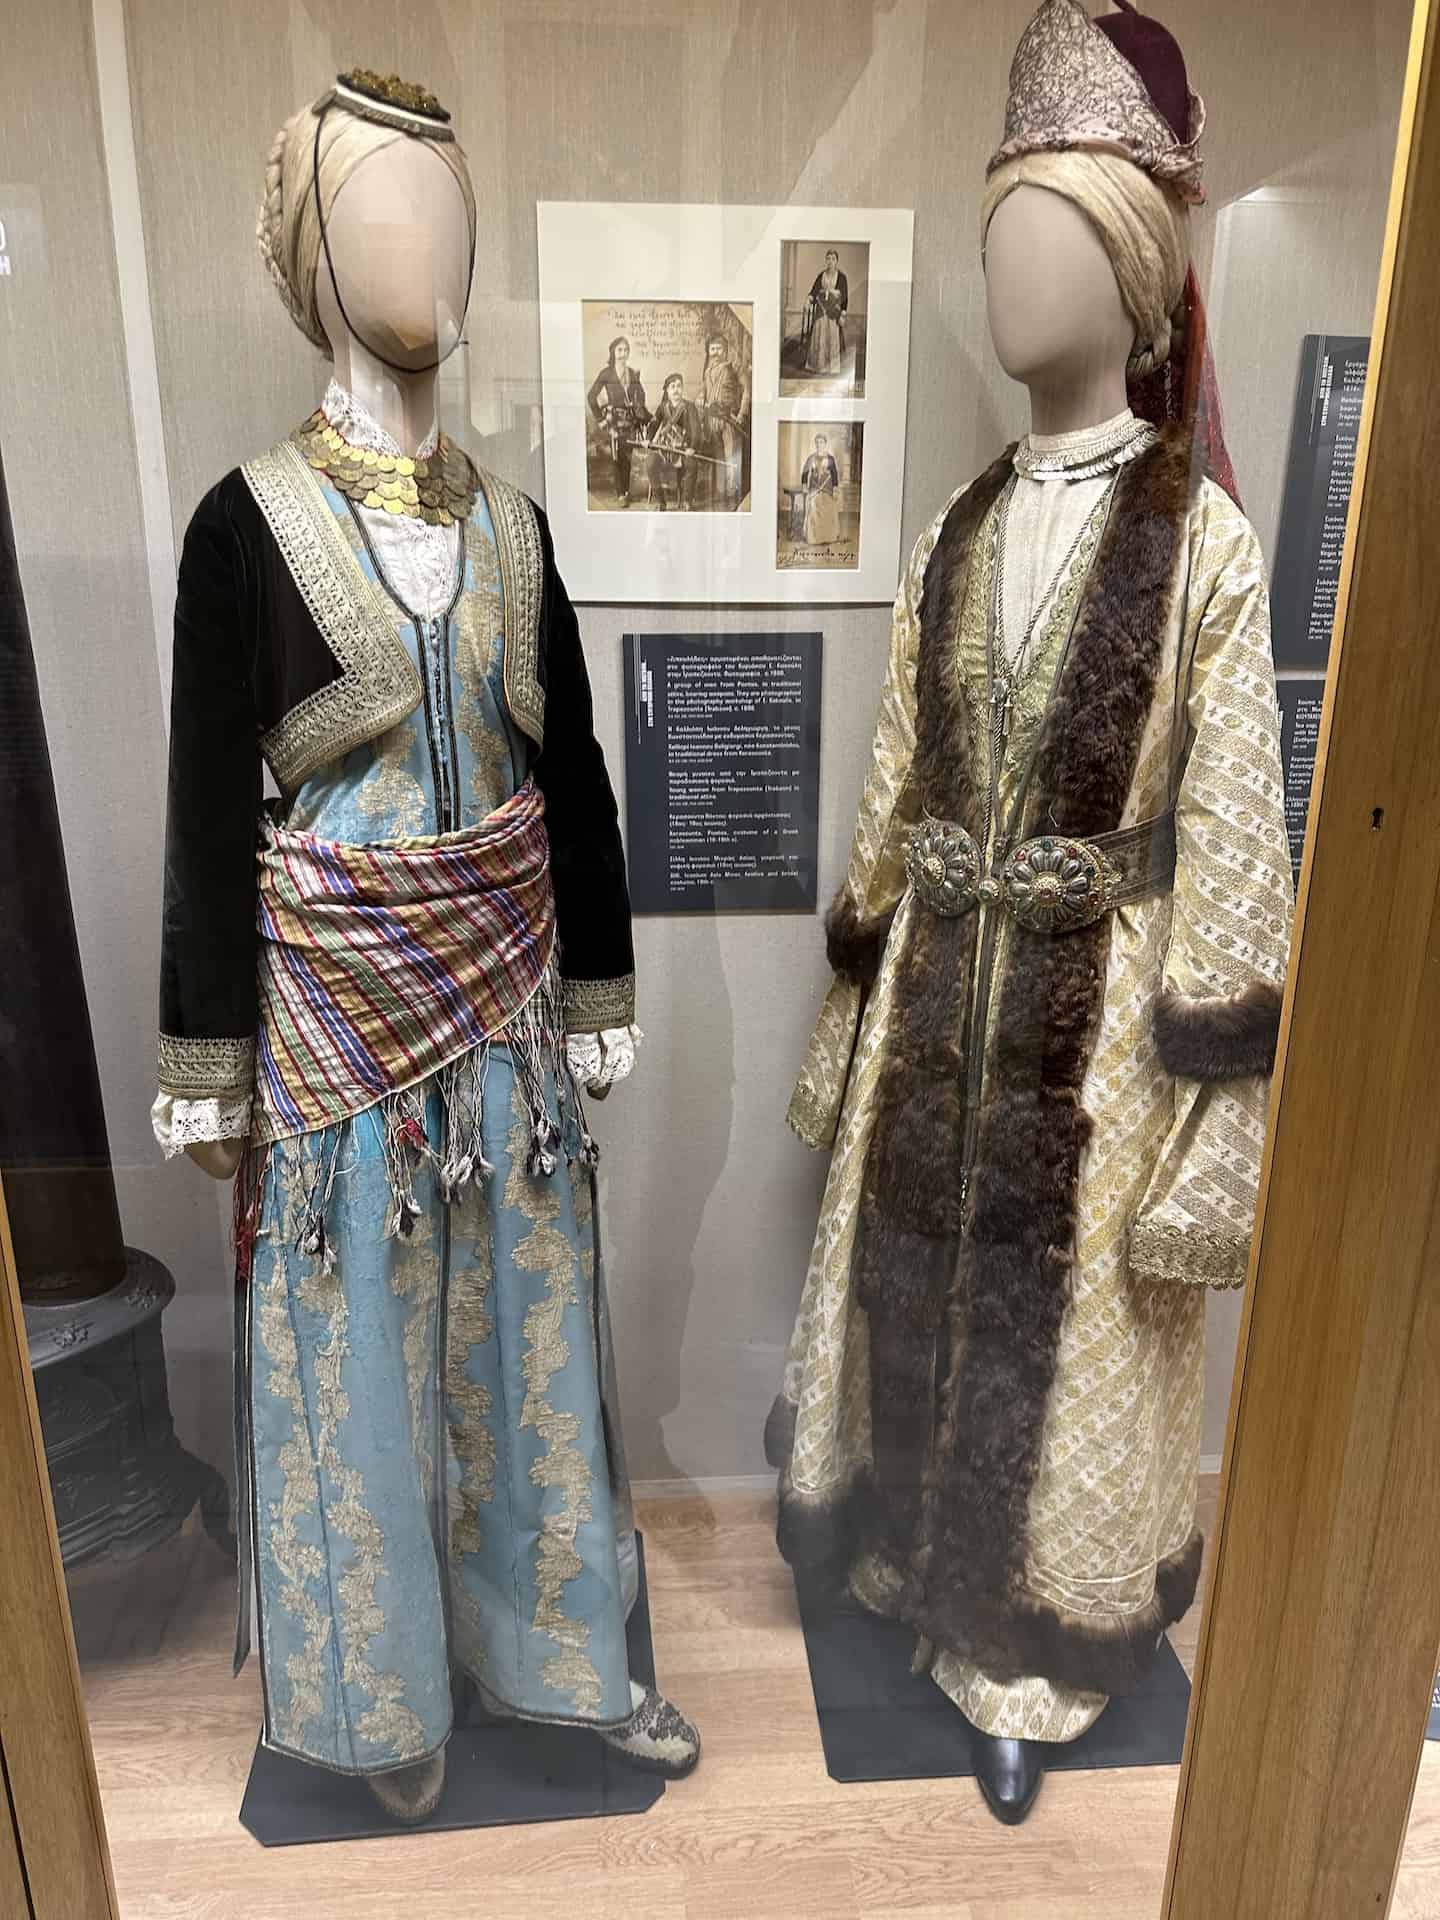 18-19th century costume of a Greek noblewoman from Kerasounta (Giresun), Pontus (left); 19th century festive and bridal costume from Sille (right)